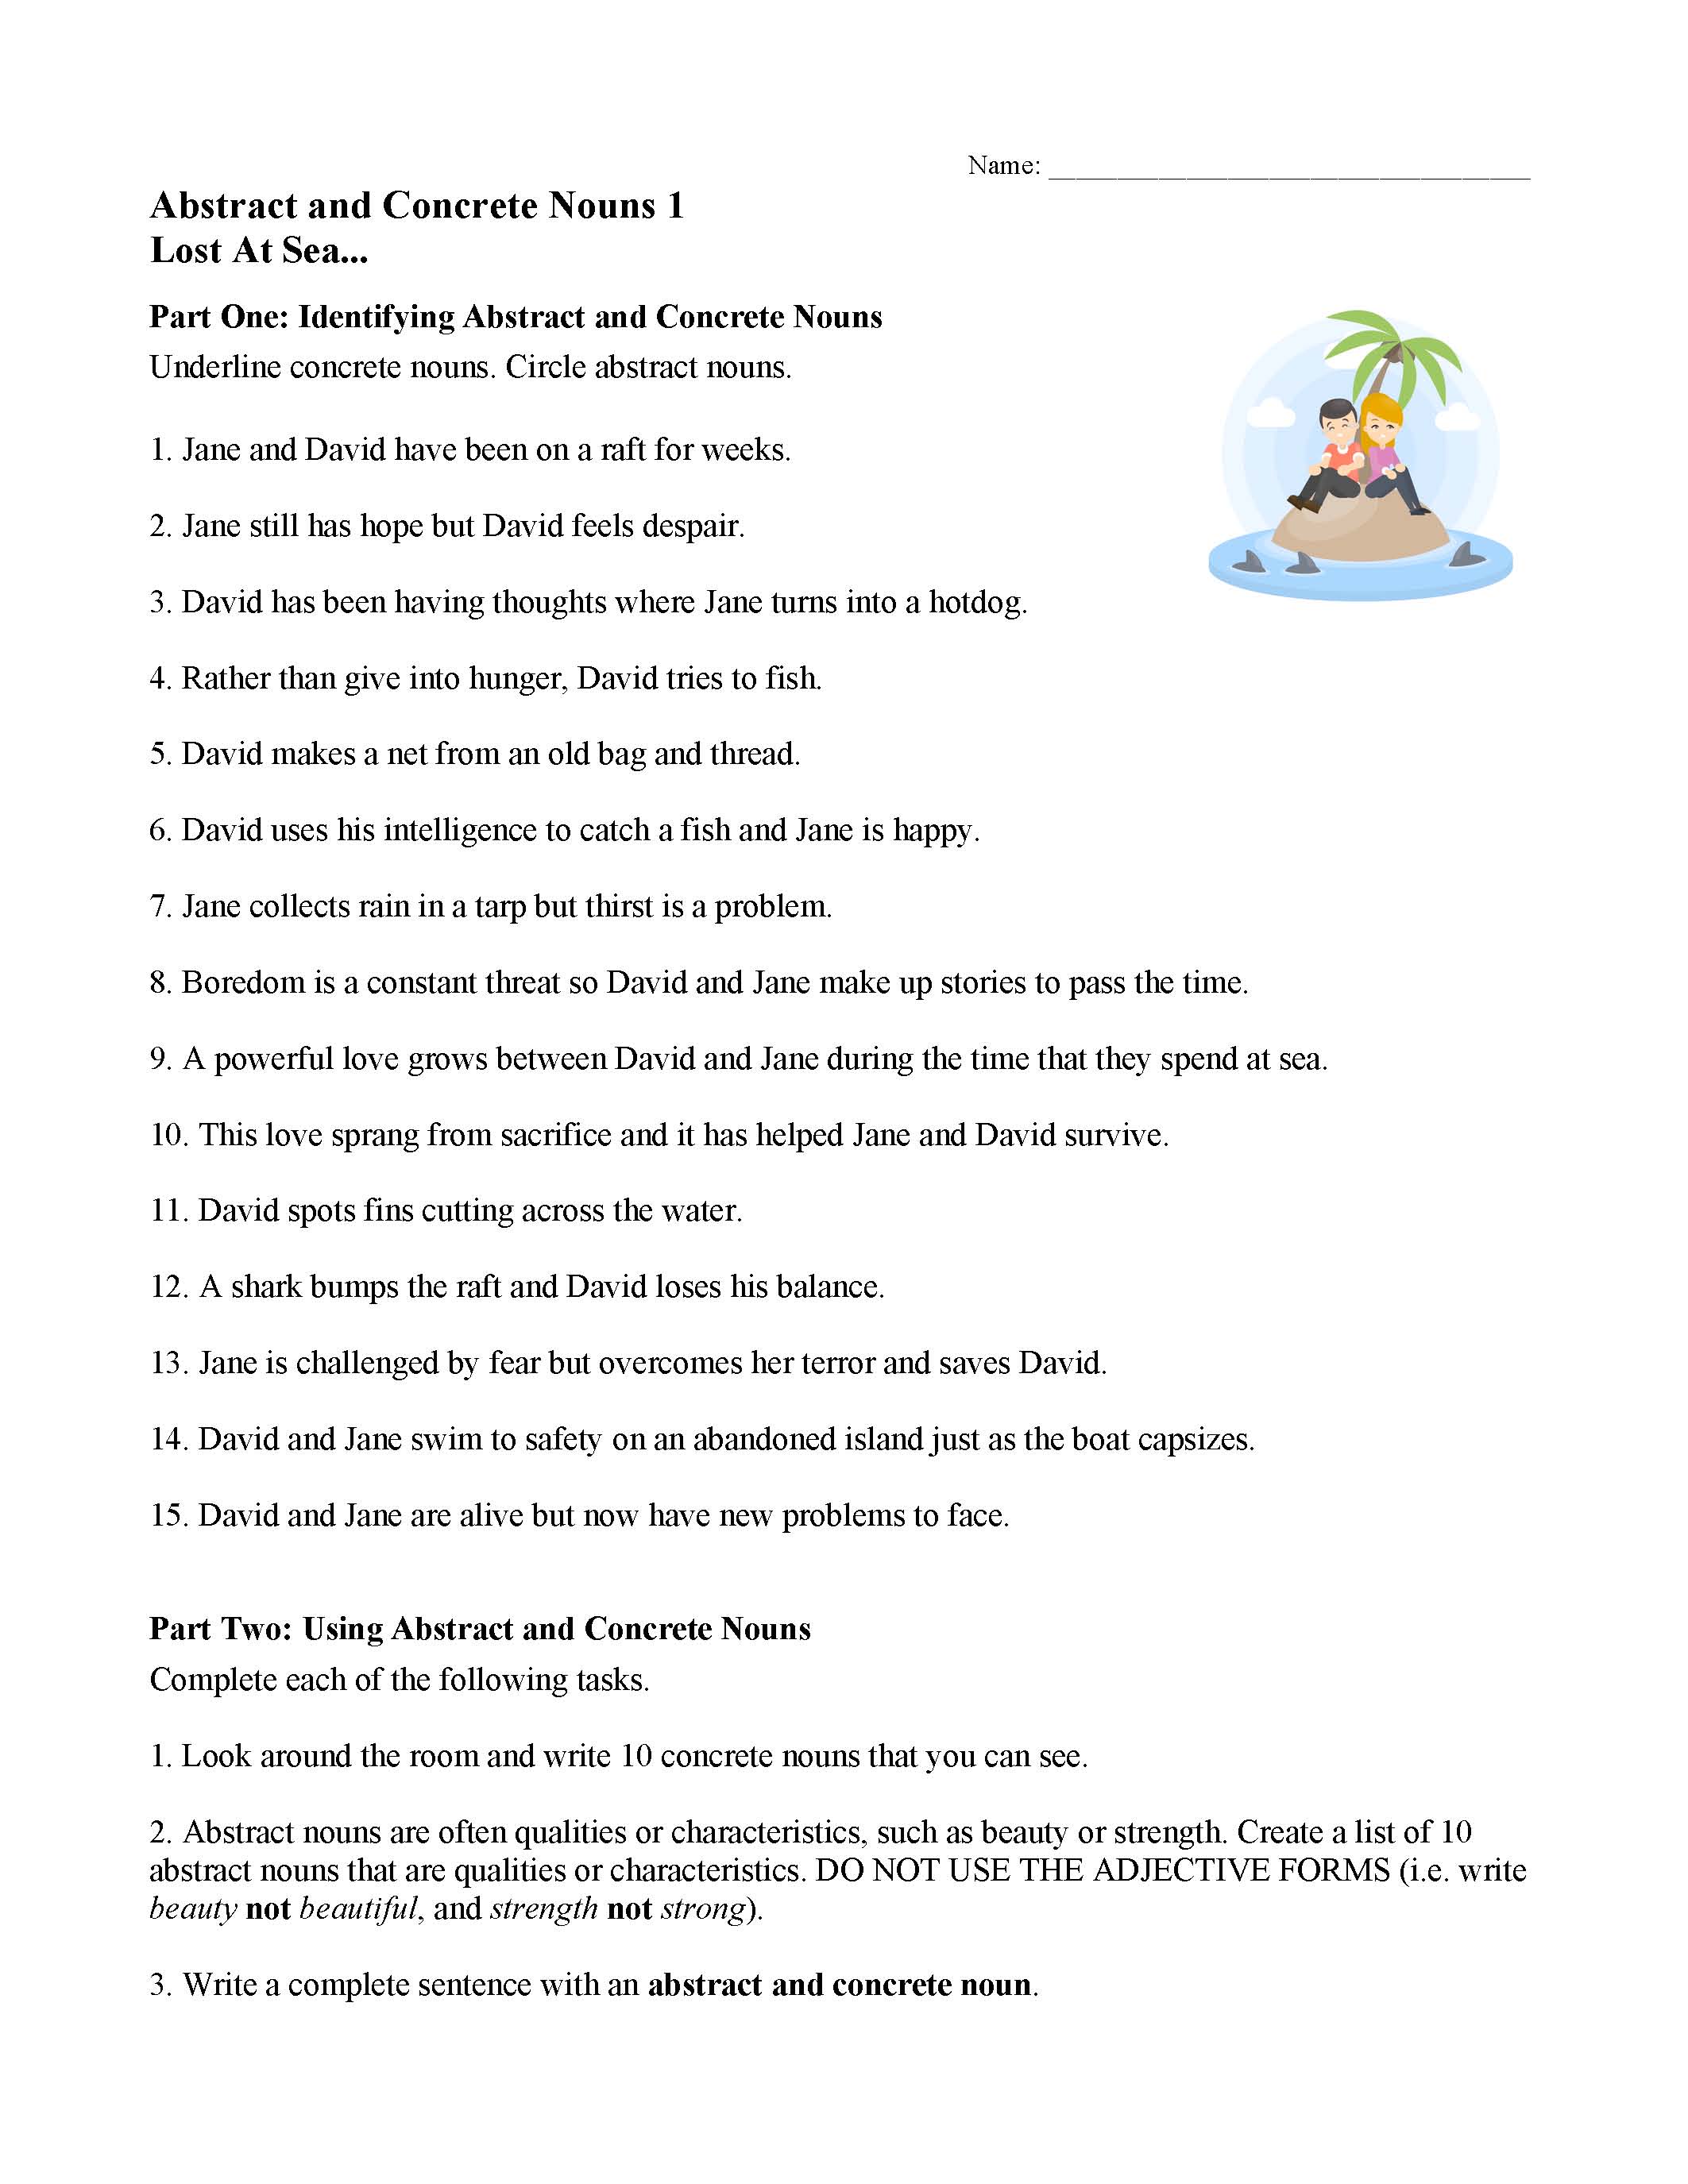 This is a preview image of Concrete and Abstract Nouns Worksheets | "Lost at Sea...". Click on it to enlarge it or view the source file.